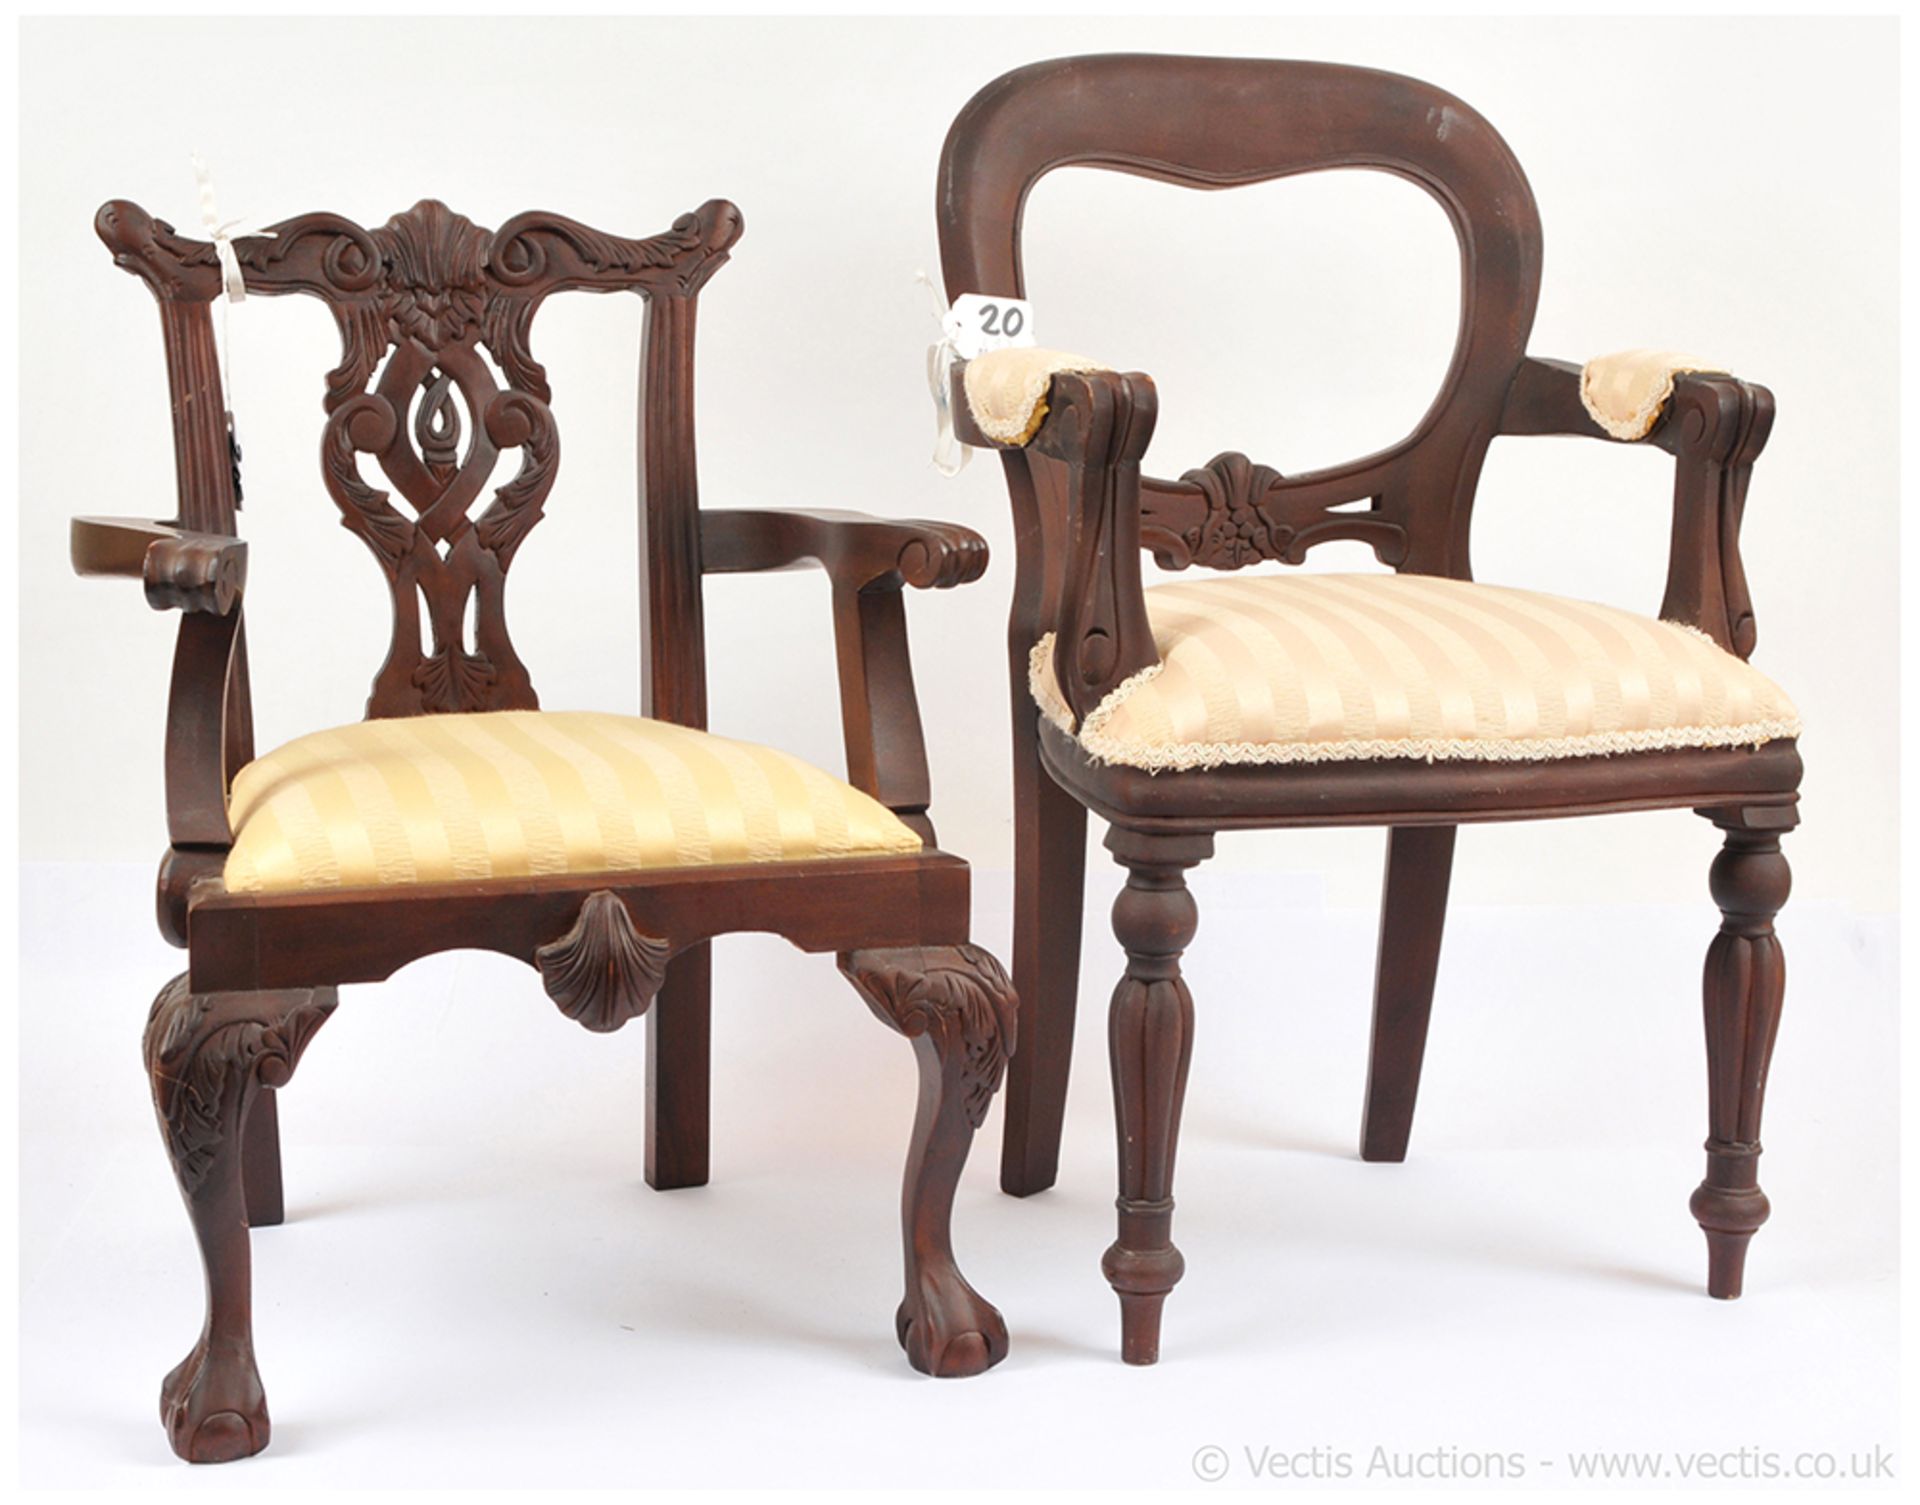 Three wooden upholstered chairs, suitable